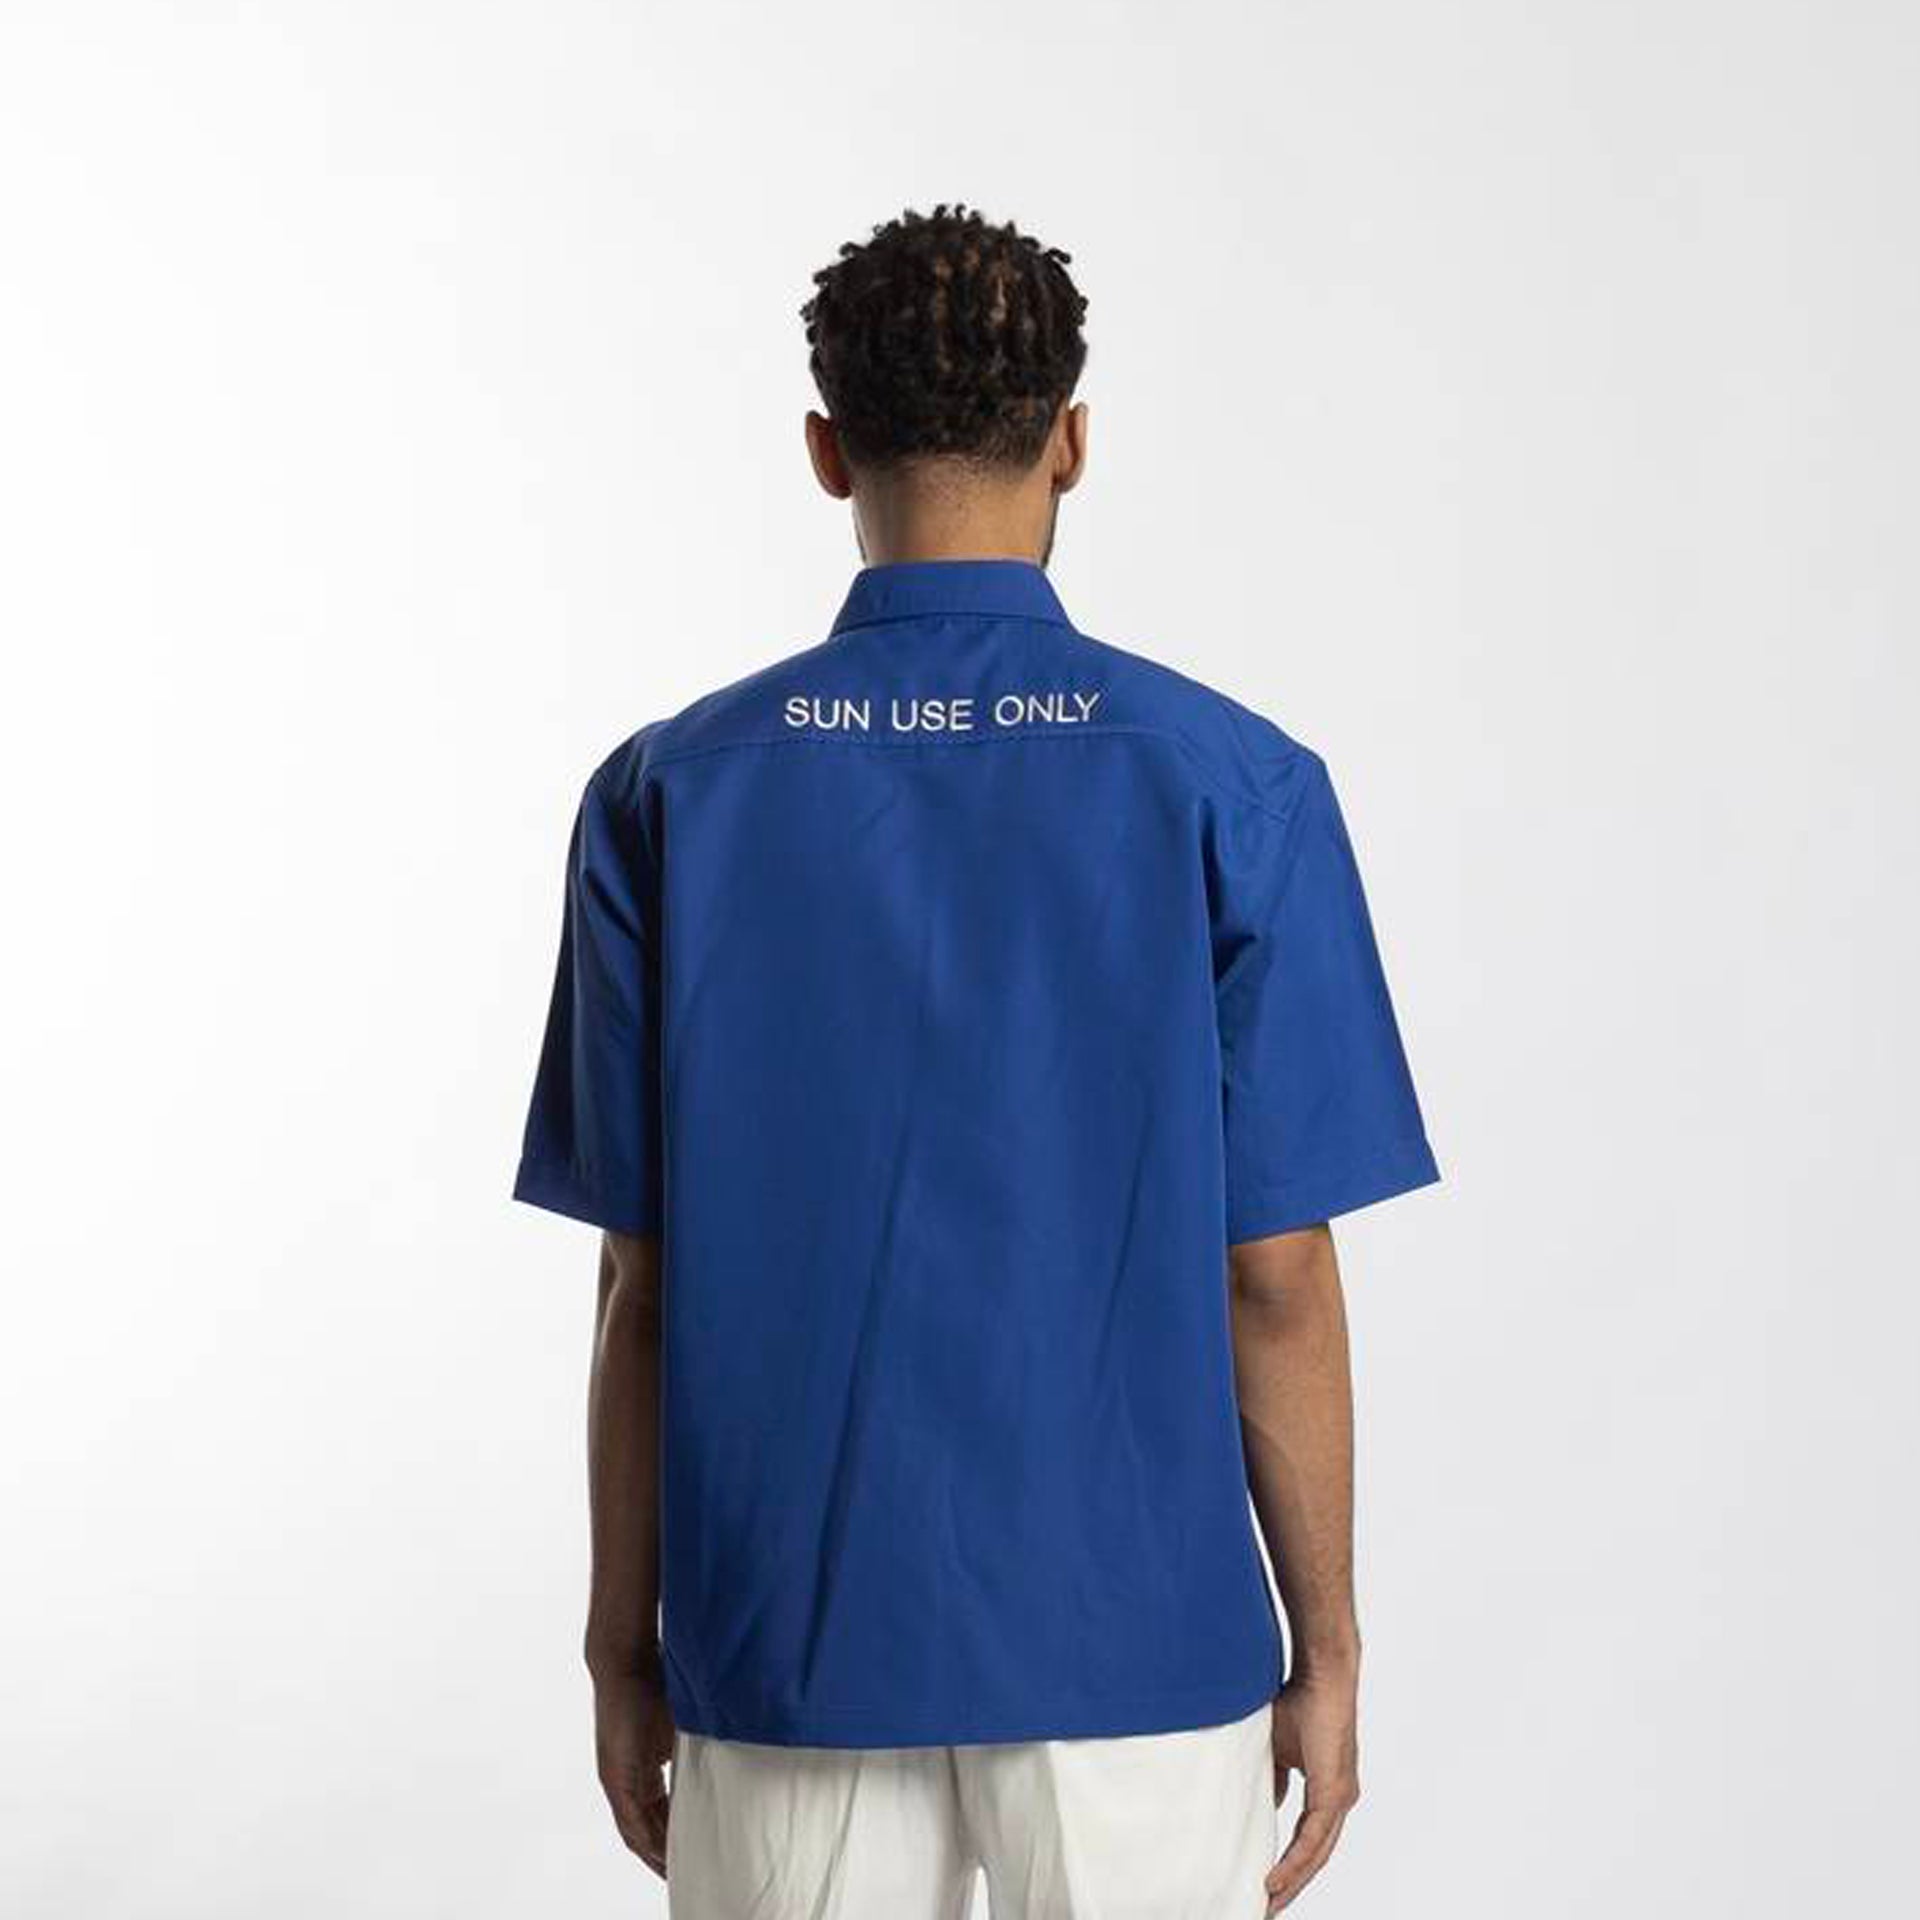 BLUE SHORT-SLEEVE SHIRT With 'Sun Use Only' Typography on the Back From Hajruss